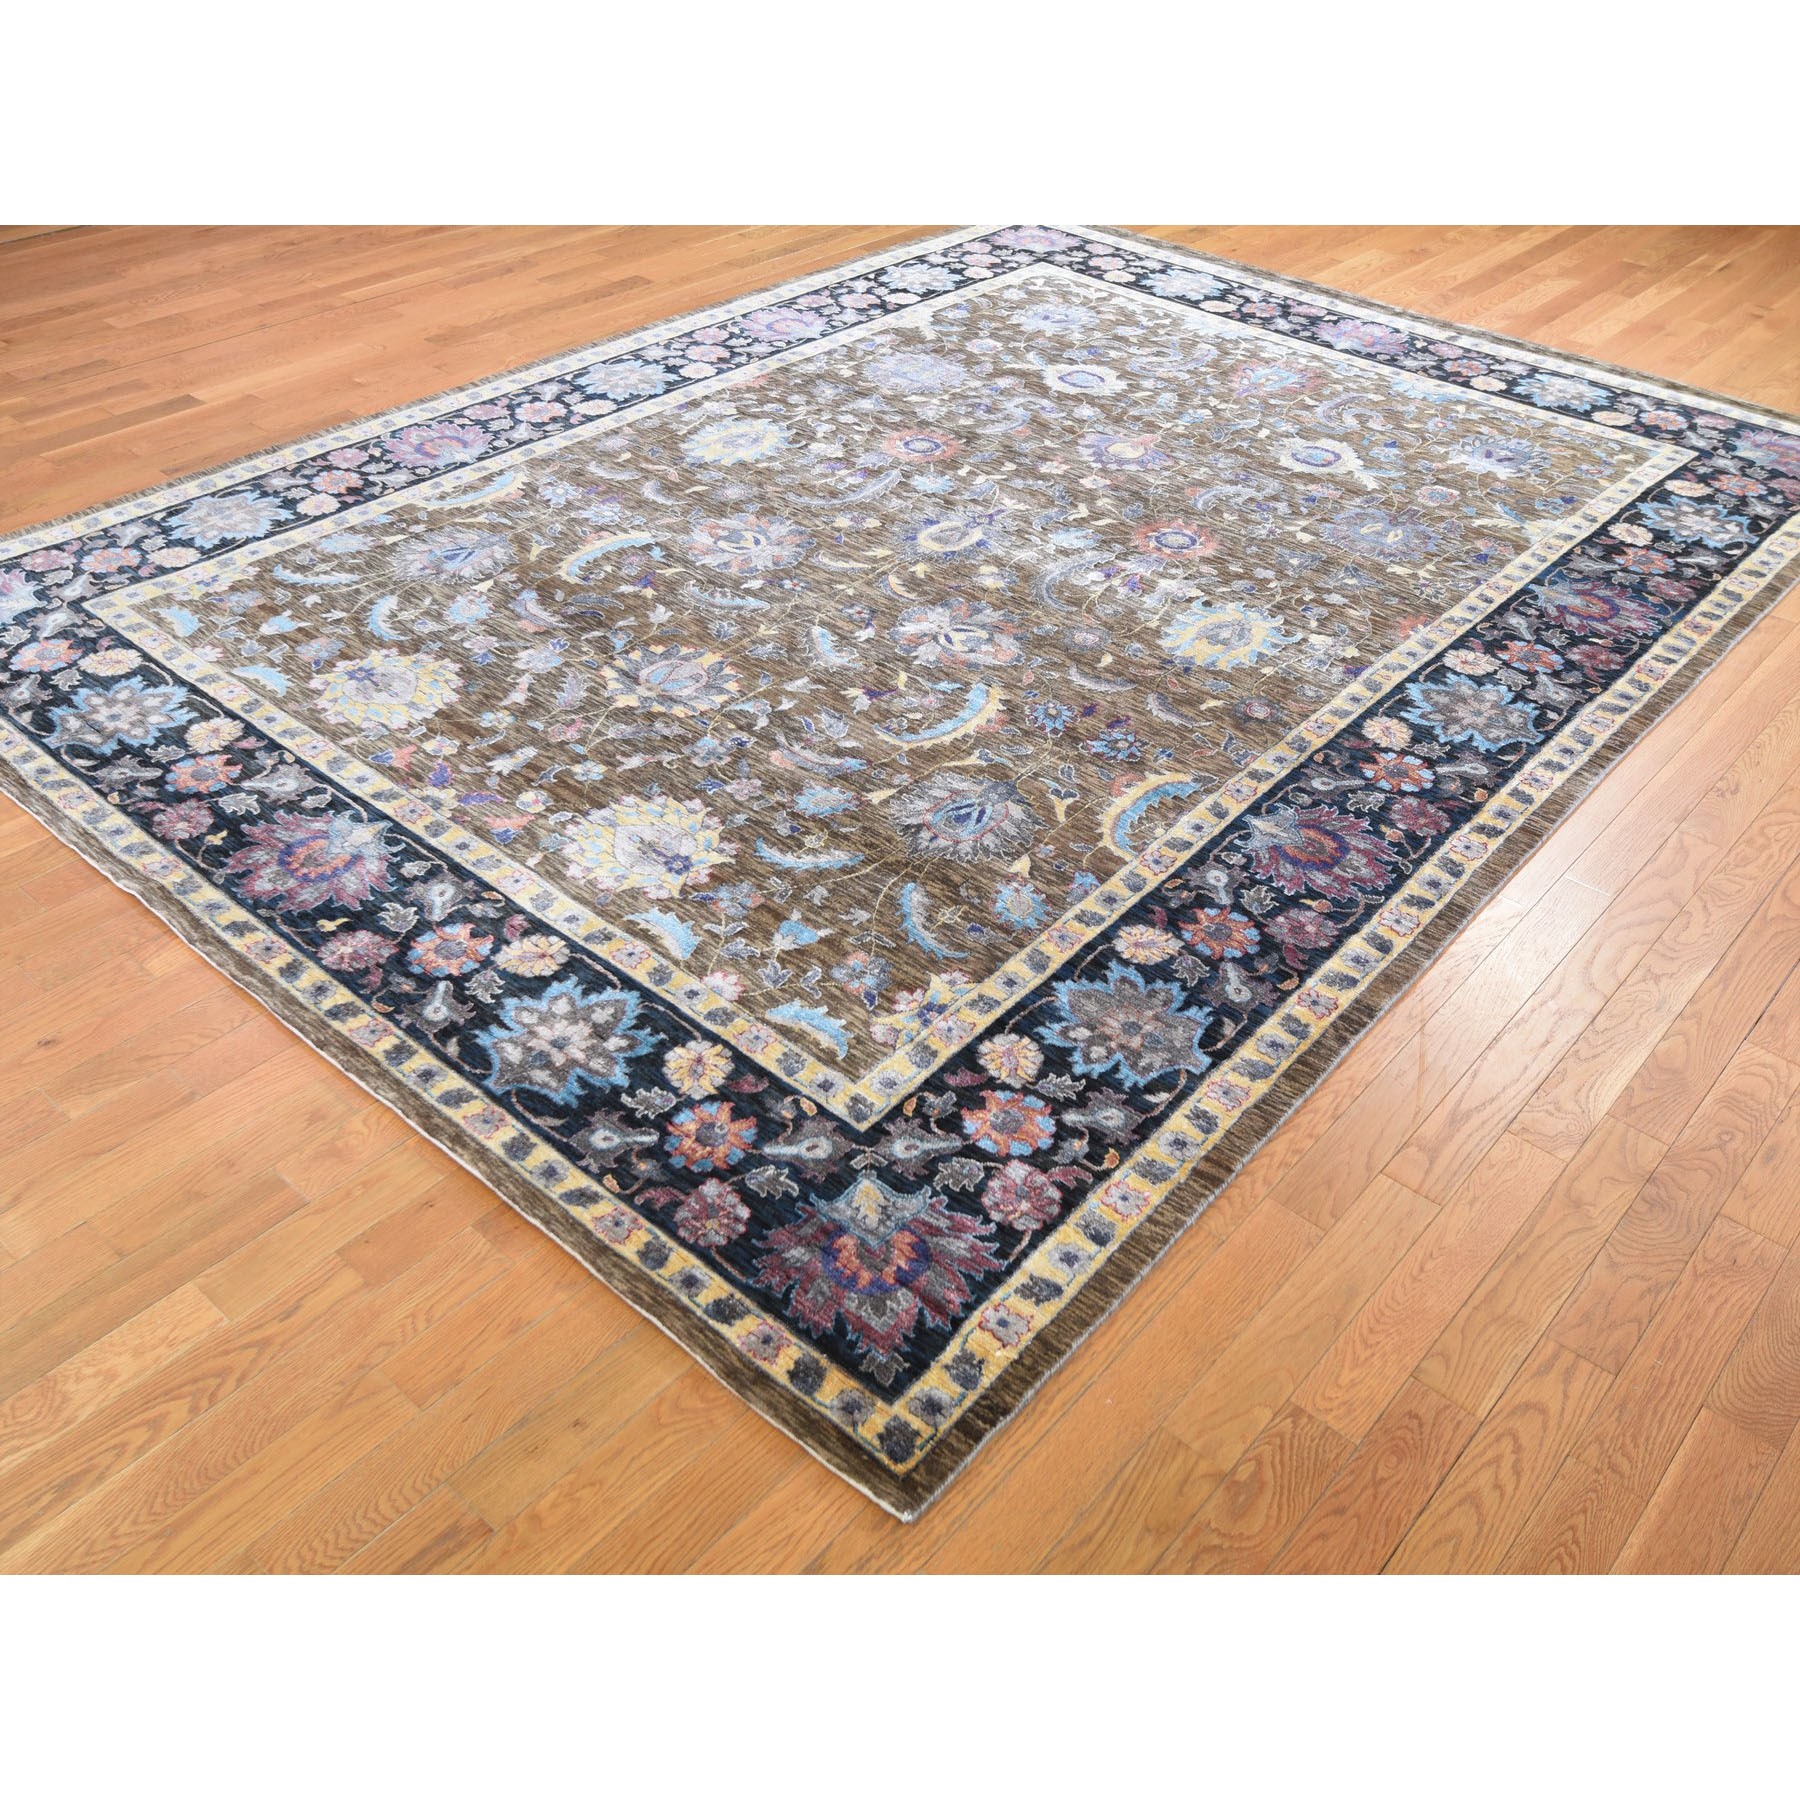 8'10"x12' Brown Silk With Textured Wool Persian Design Hand Woven Oriental Rug 